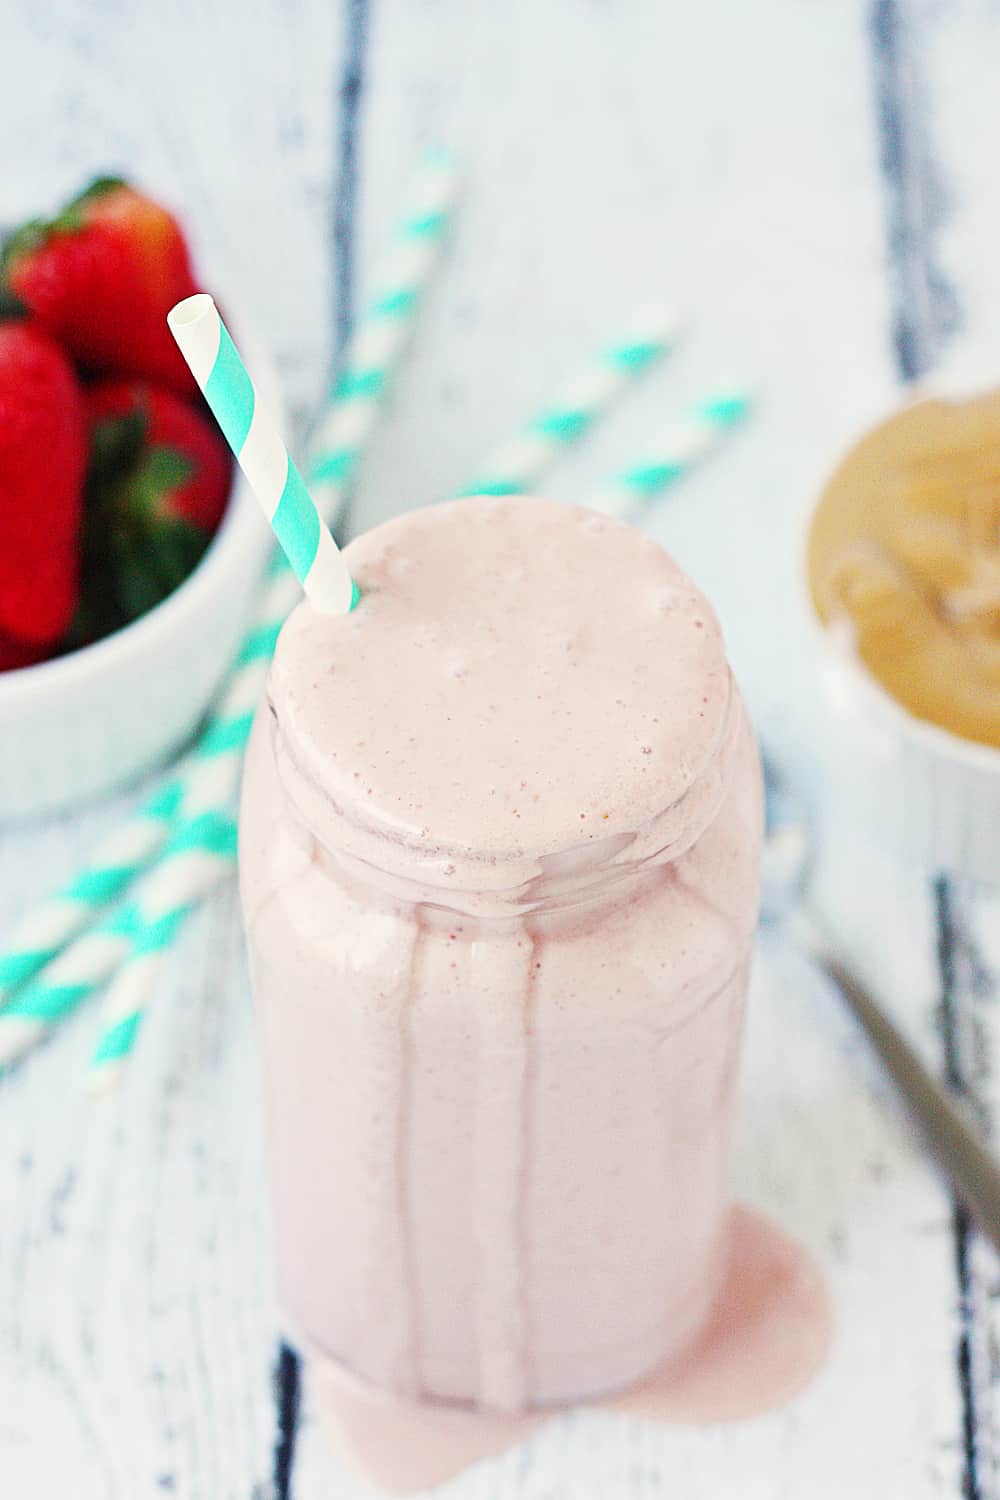 3-Ingredient Peanut Butter & Jelly Smoothie